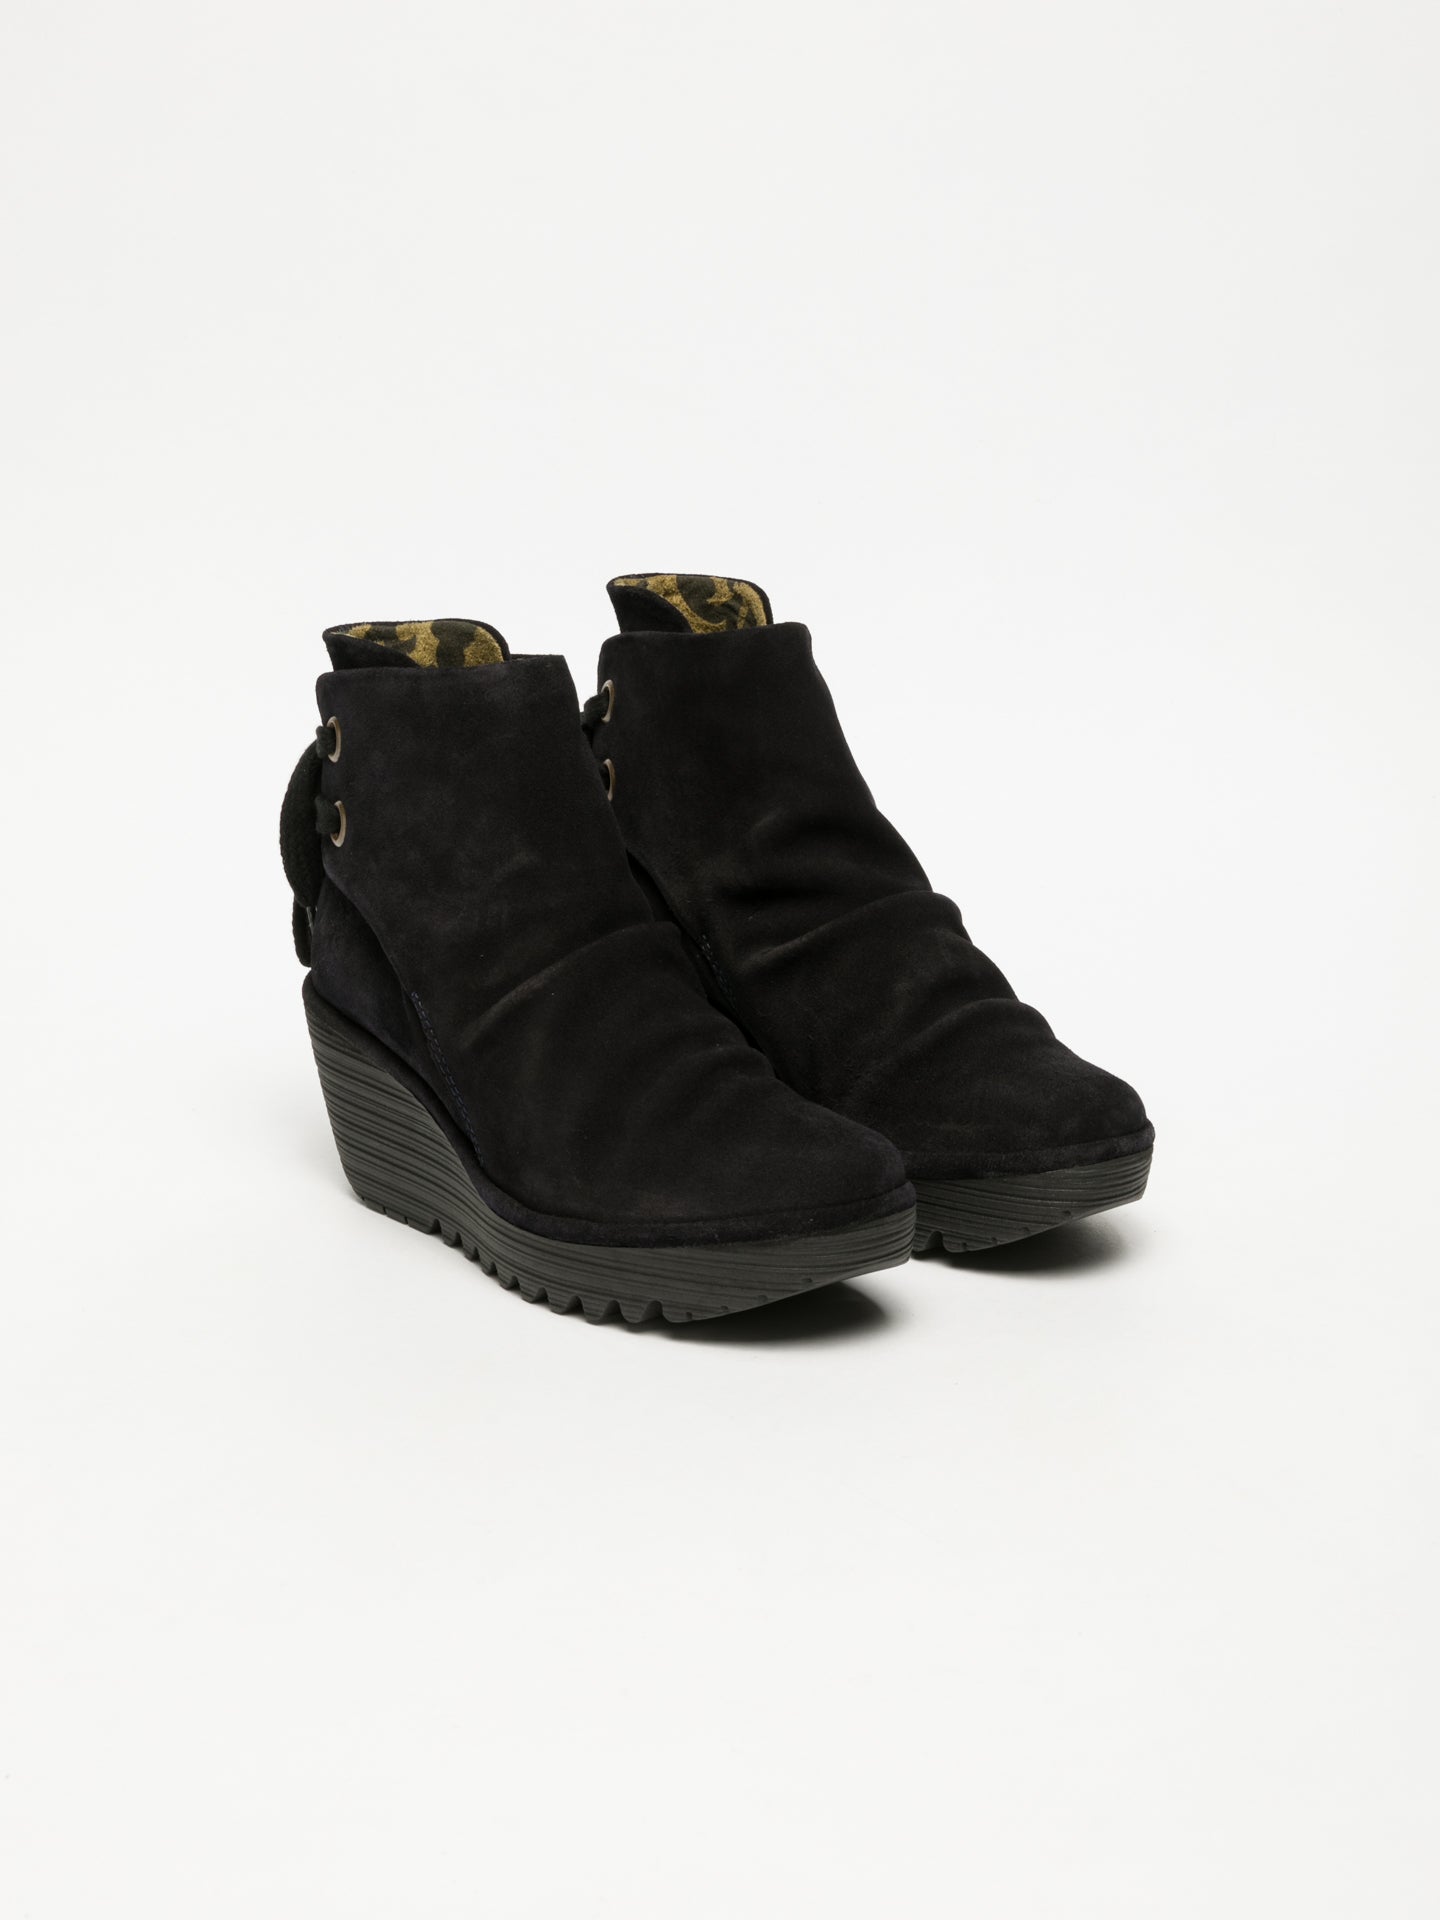 Fly London Carbon Black Wedge Ankle Boots